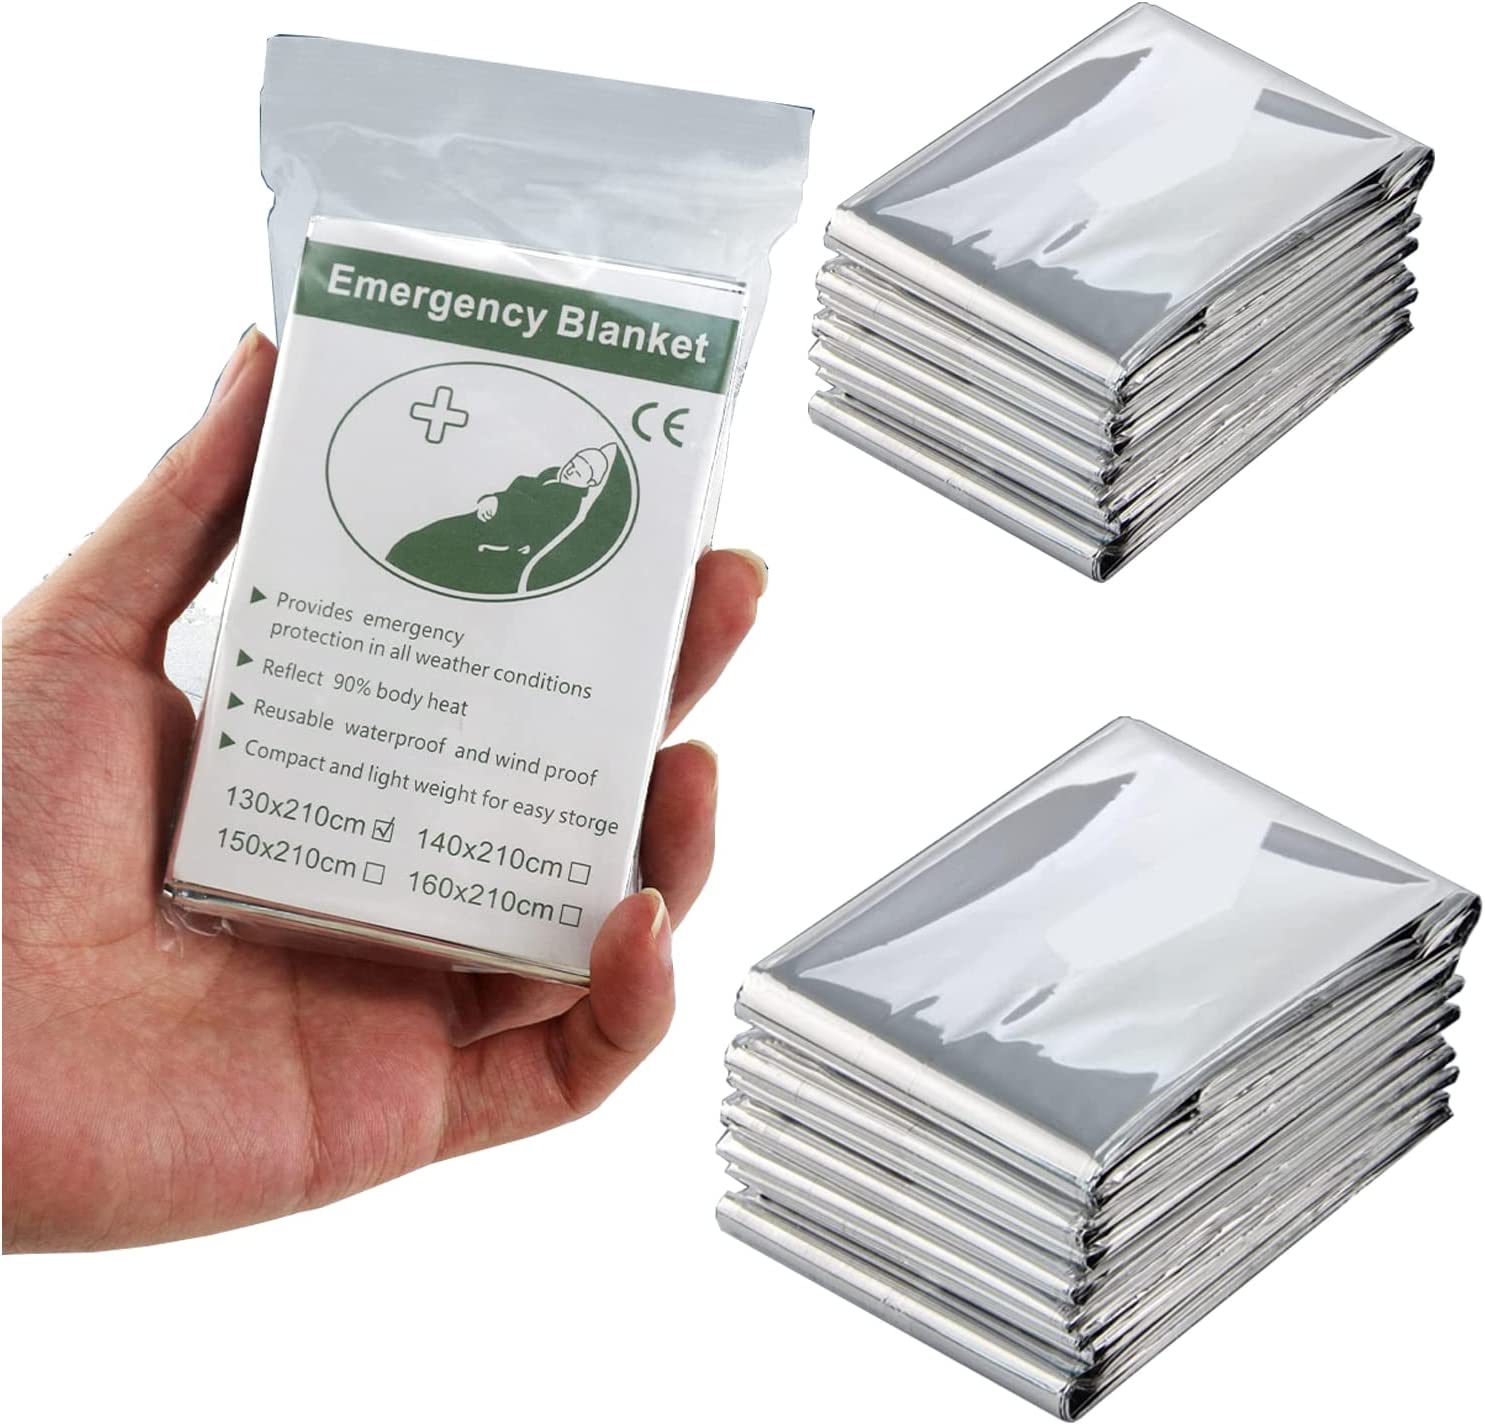 Emergency Blankets for Survival Gear and Equipment x2, Space Blanket, Mylar Blankets, Thermal Blanket, Survival Blanket, Foil Blanket Camping Shelter, Emergency Preparedness Items, Emergency Supplies